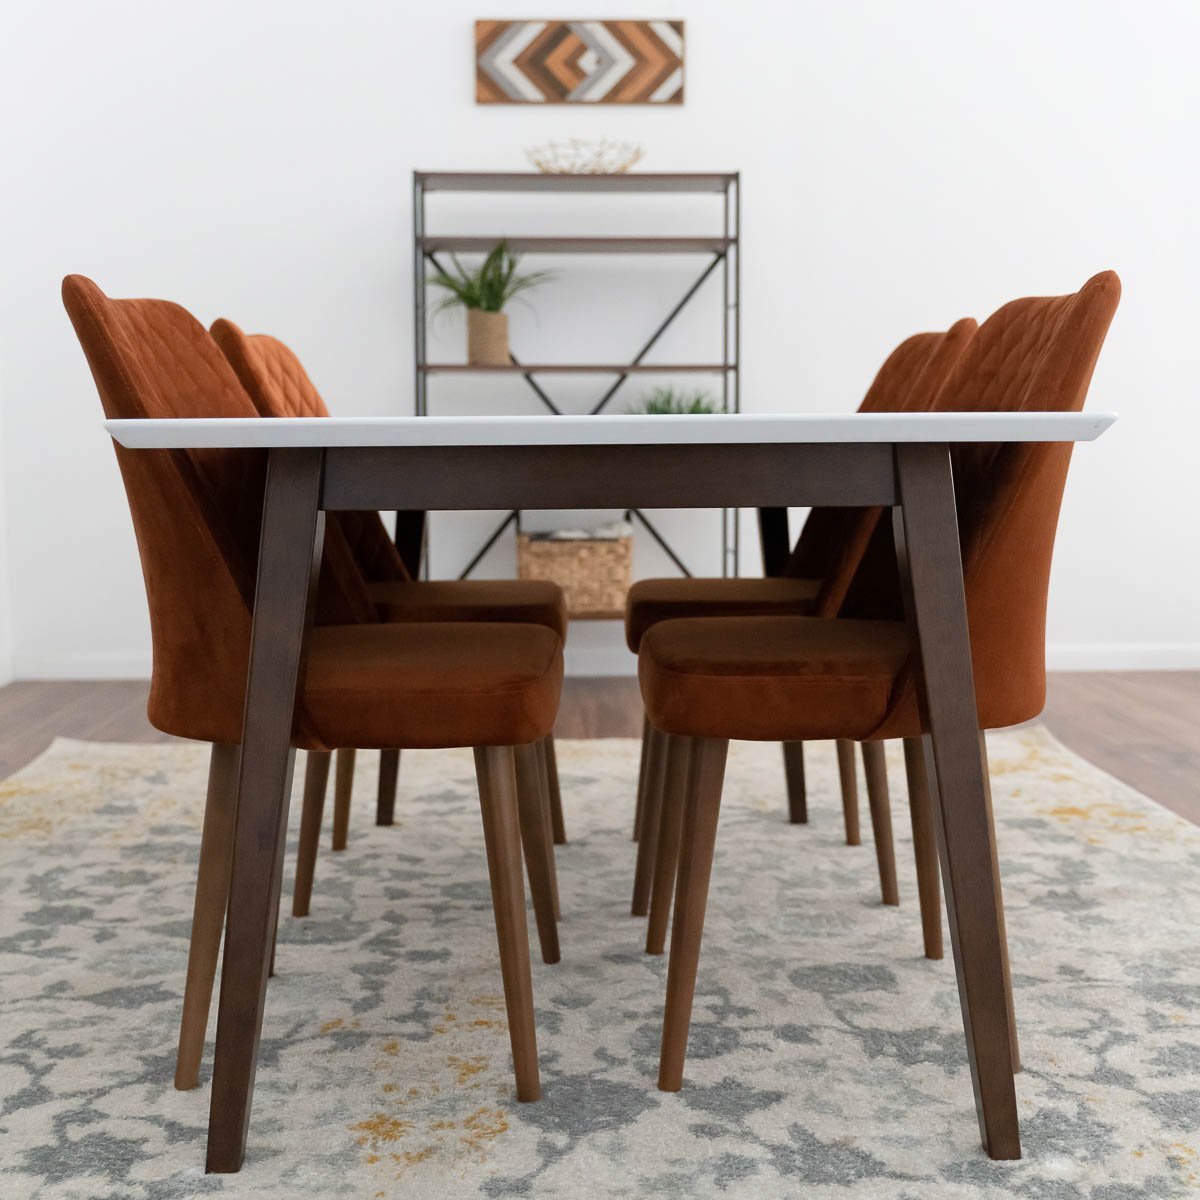 Alpine (Large) White Dining Set with 4 Evette Orange Dining Chairs | Mid in Mod | Houston TX | Best Furniture stores in Houston